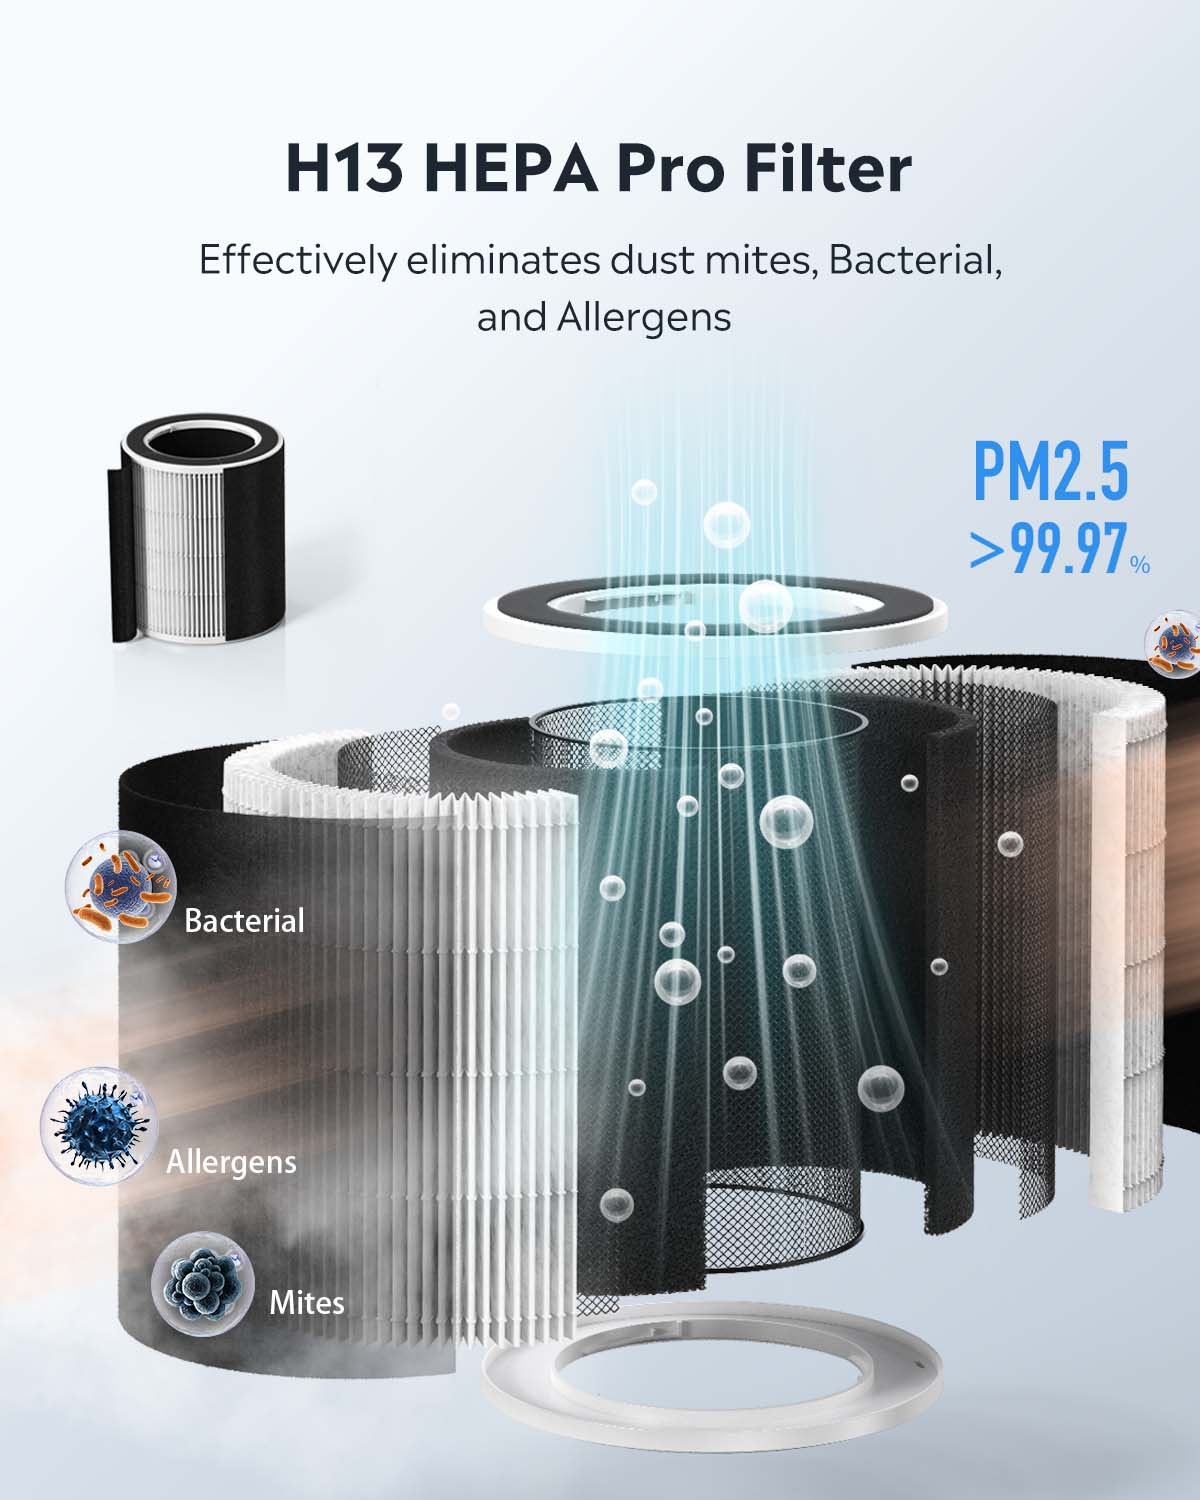 Assure yourself of clean and fresh air with our Air Purifier's powerful 3-stage filtration process